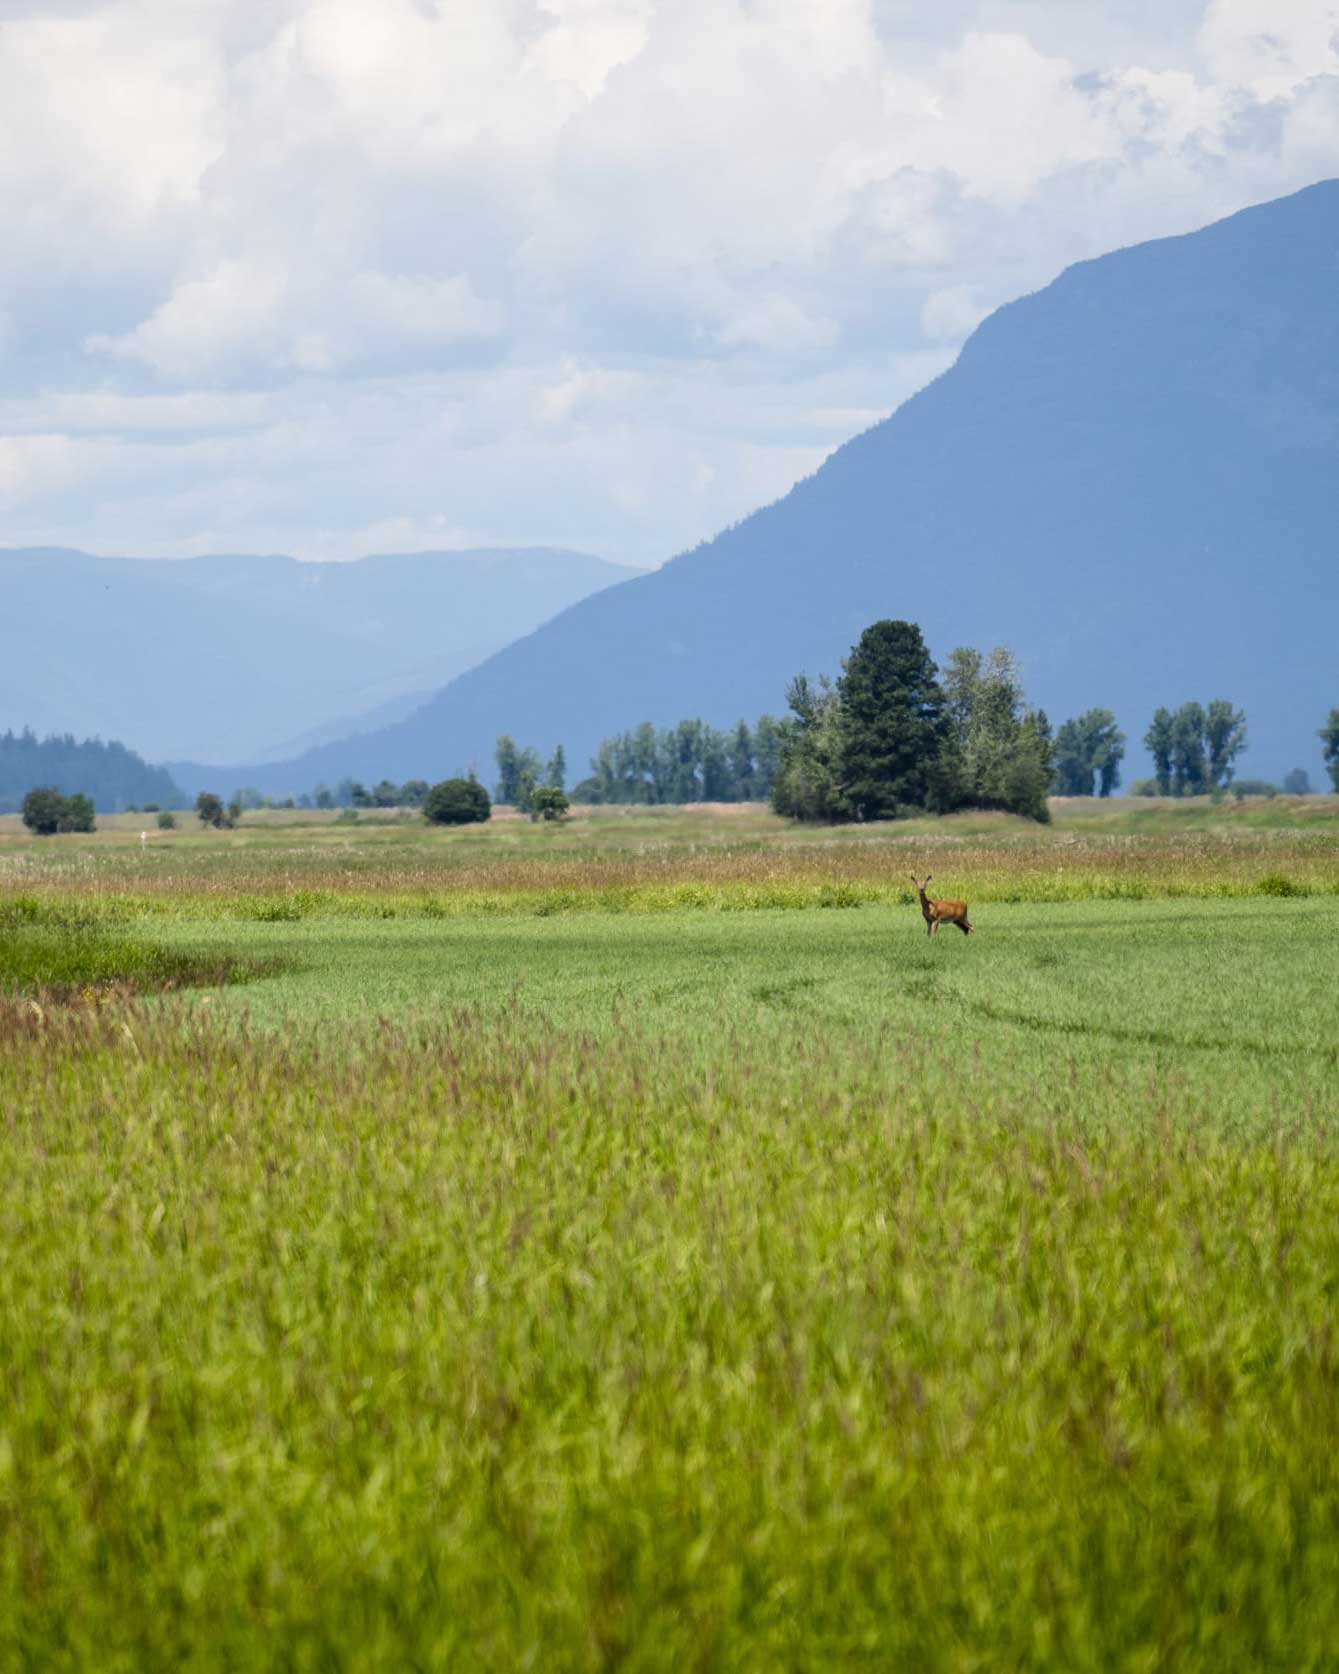 a deer standing in a meadow of green grass with mountains in the background 
			